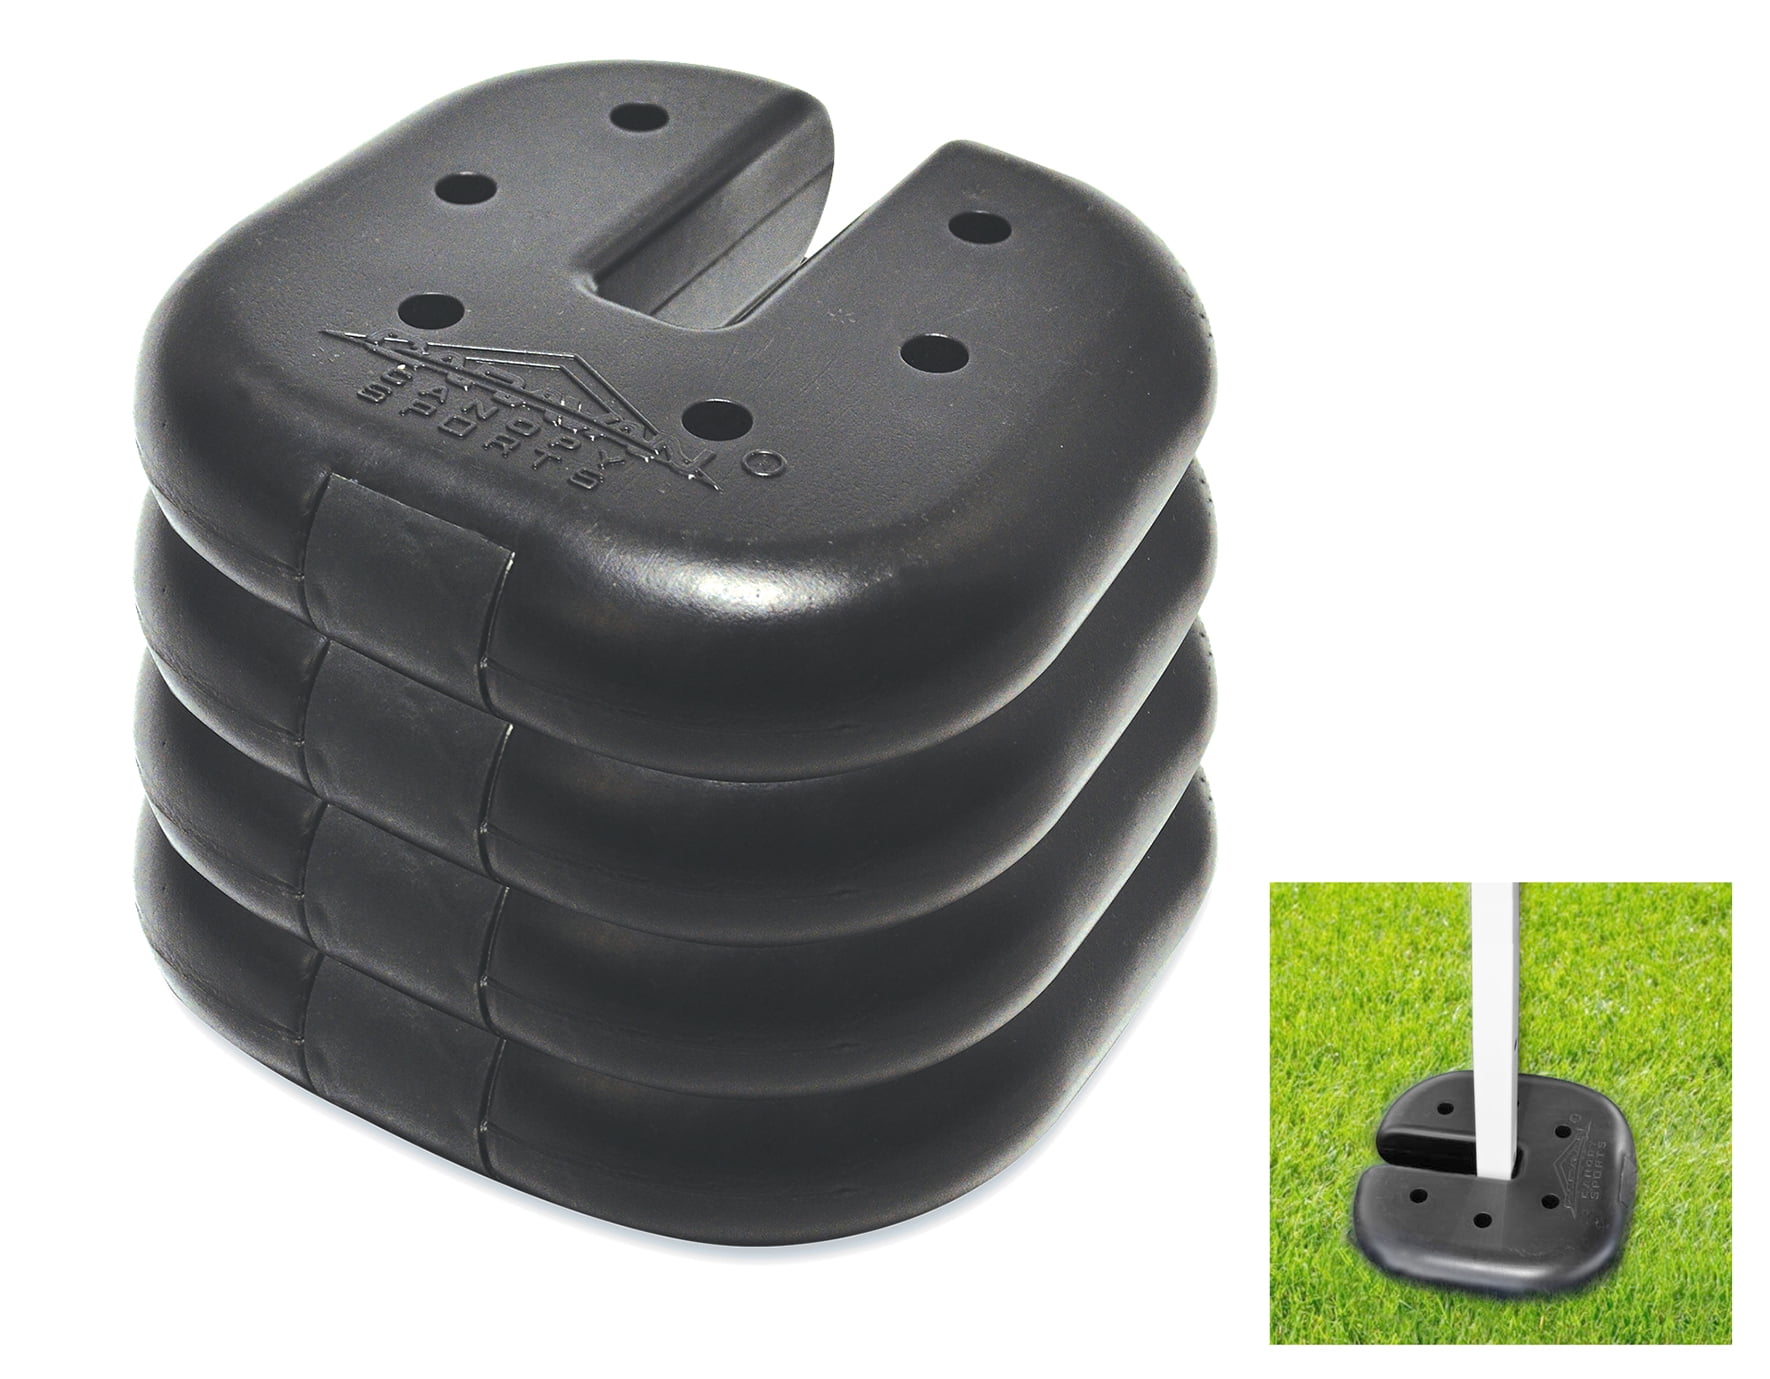 Set of 4 Caravan Canopy Durable Rubber 6 Pound Cement Canopy Weight Plates